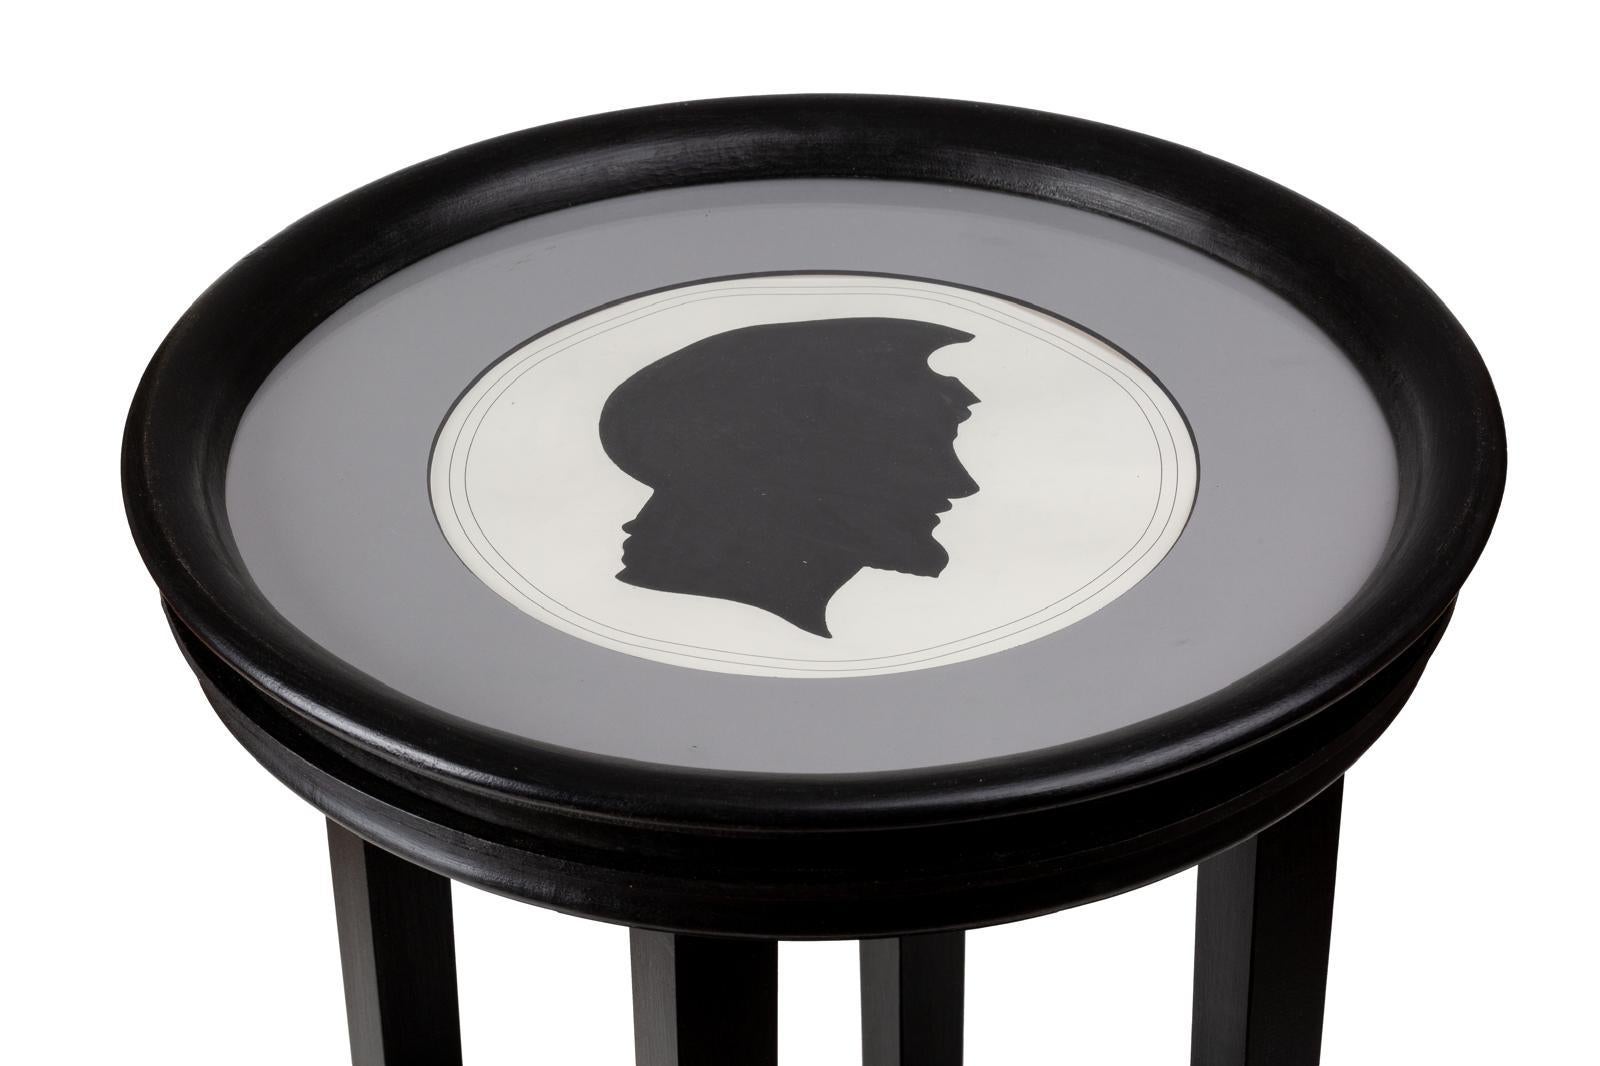 One of two beautiful side table with a neoclasssical man silhouette black profile print with white background, framed by  a delicate grey passpartout and a round black frame with glass. 
This coffee table fits well in any space and type of furniture